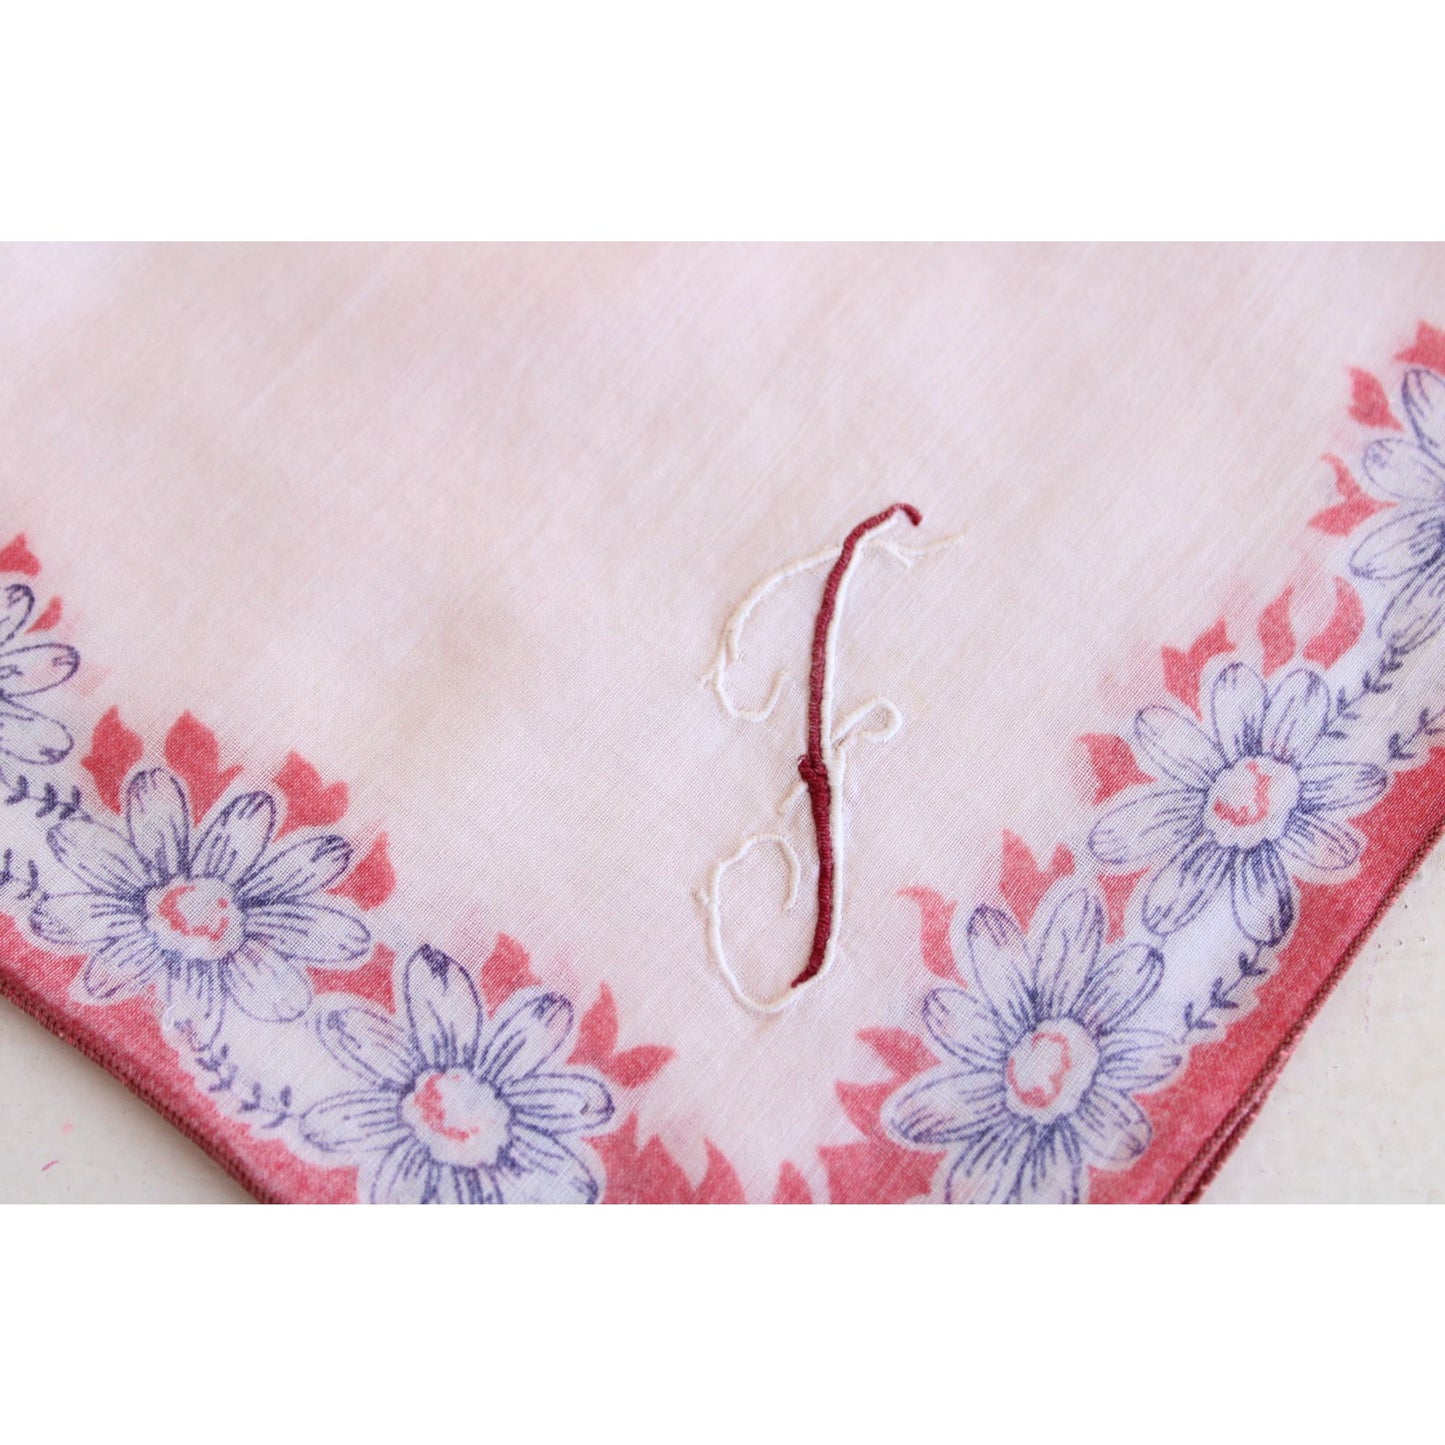 Vintage 1950s Handkerchief Monogrammed With Embroidered F